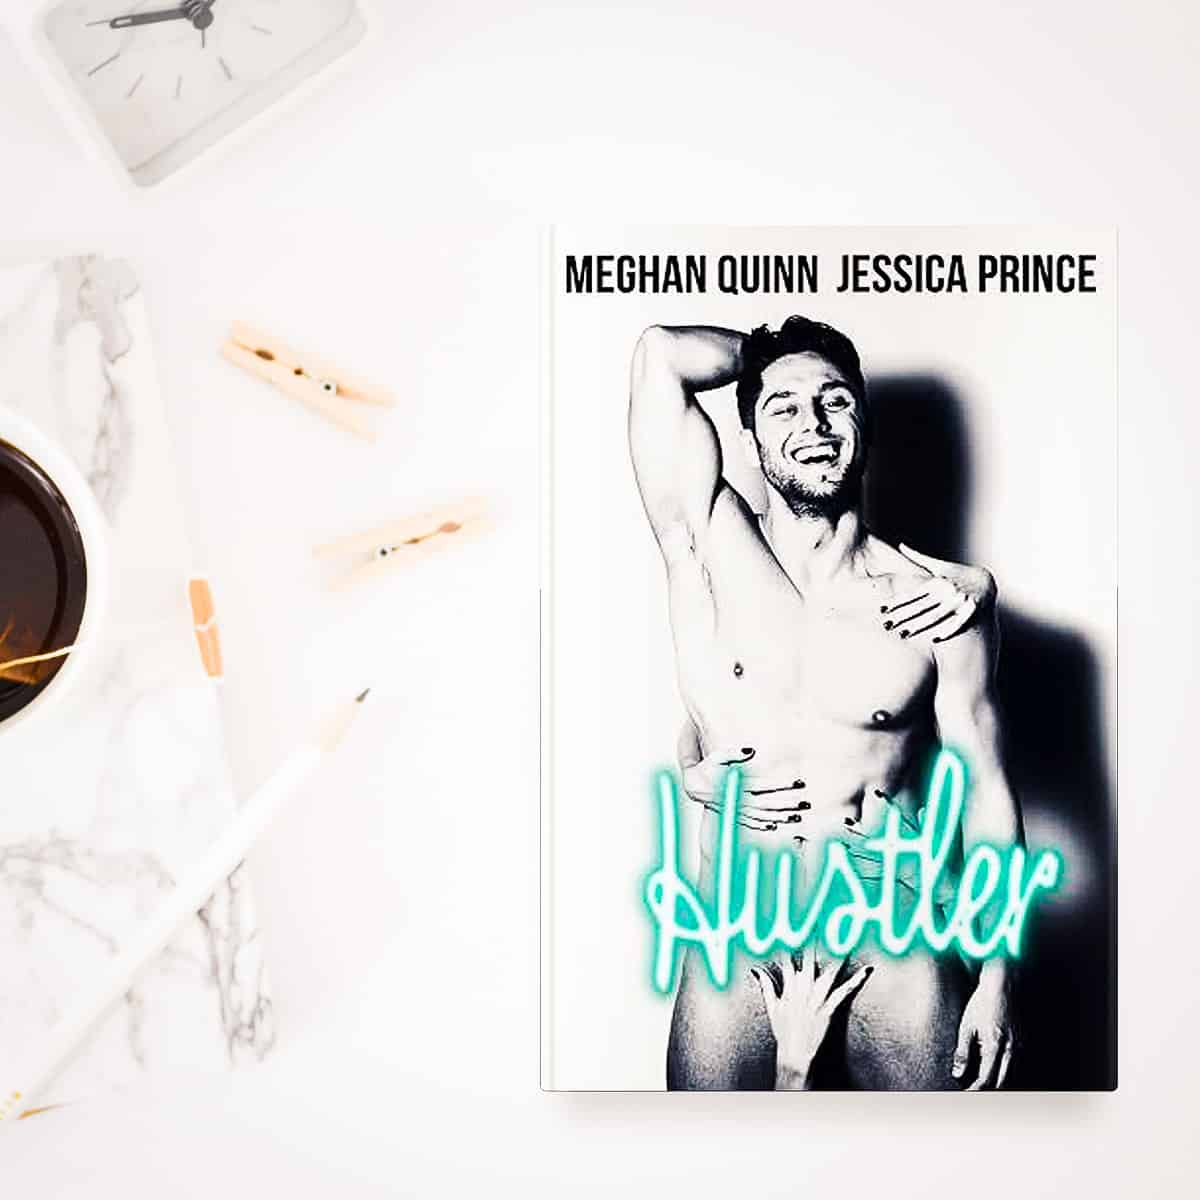 Hustler by Meghan Quinn and Jessica Prince is a hilarious romantic comedy about a Las Vegas gambler and the cocktail waitress who wants nothing to do with him